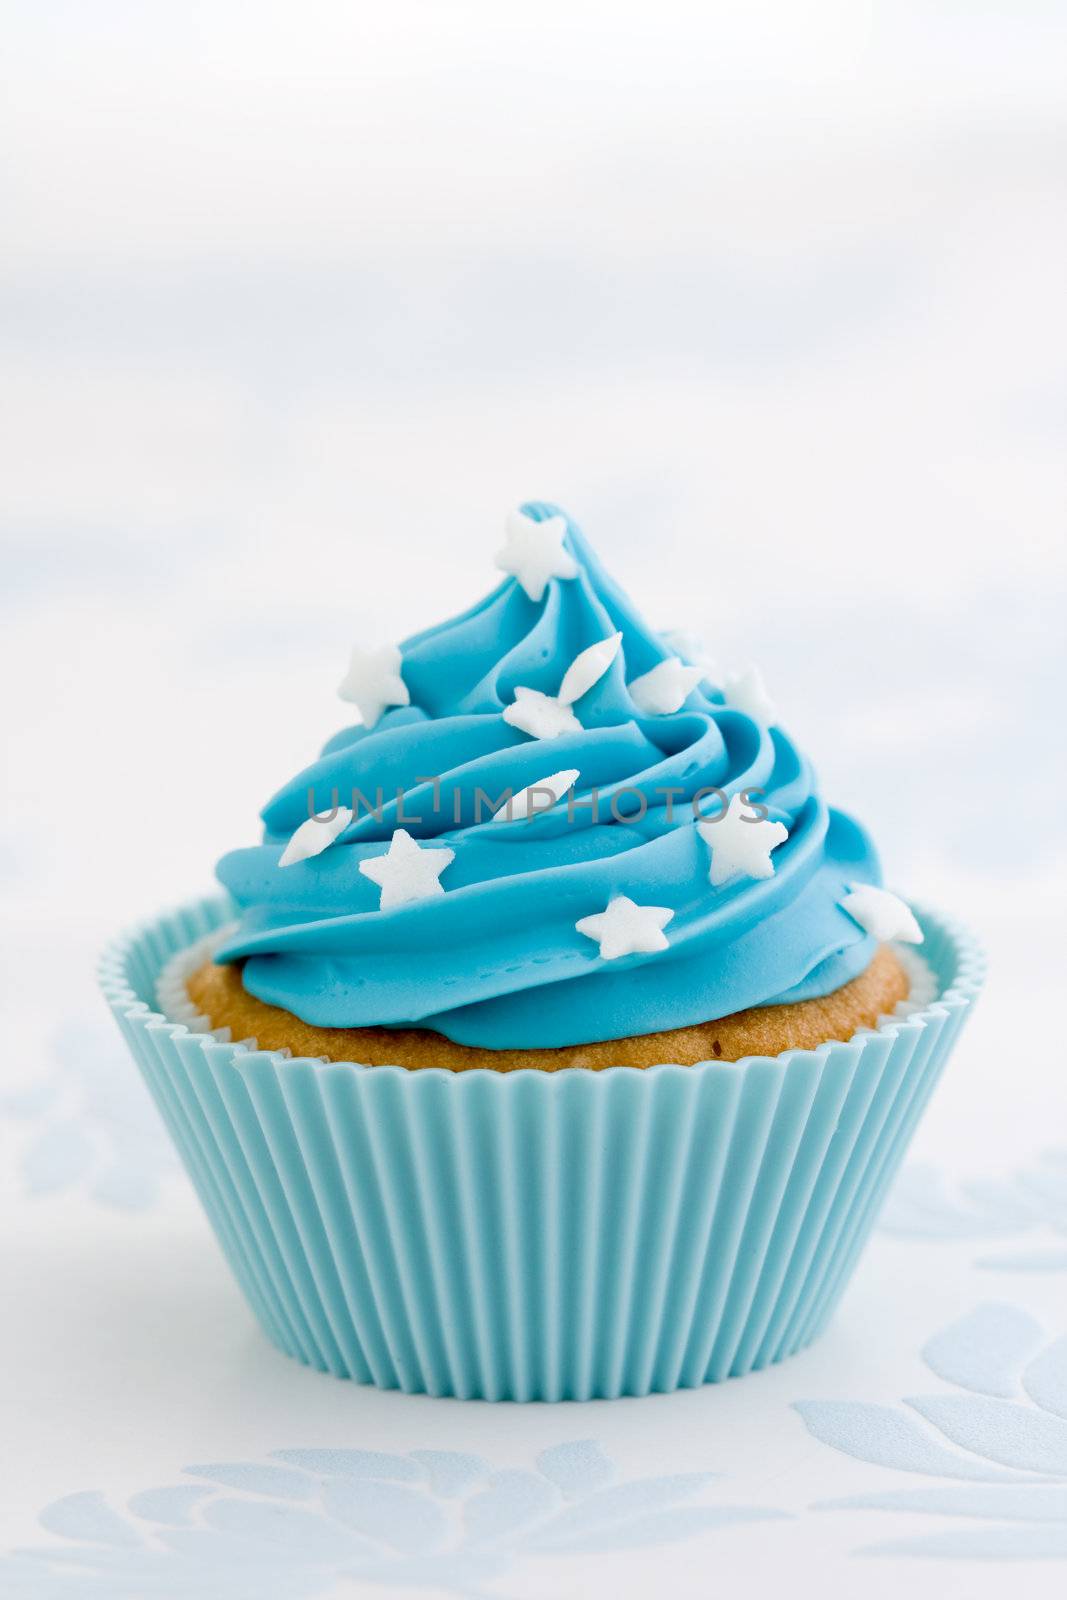 Cupcake decorated with blue frosting and white sugar stars